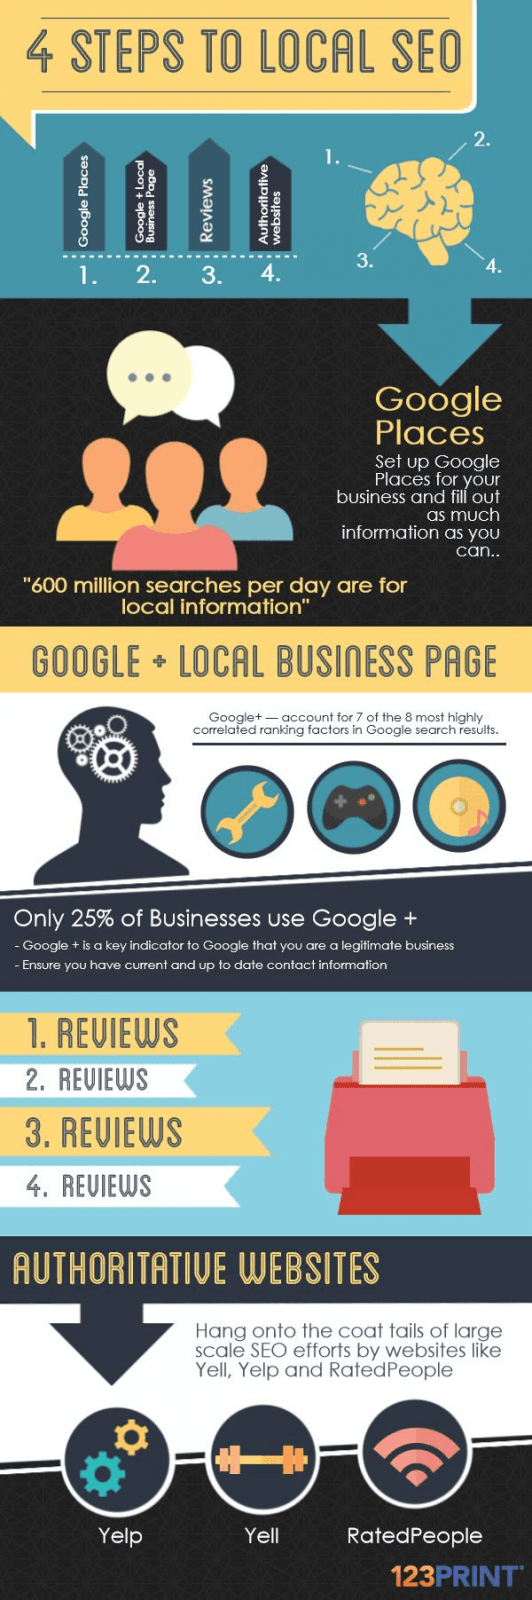 4 Steps To Local SEO - Infographic